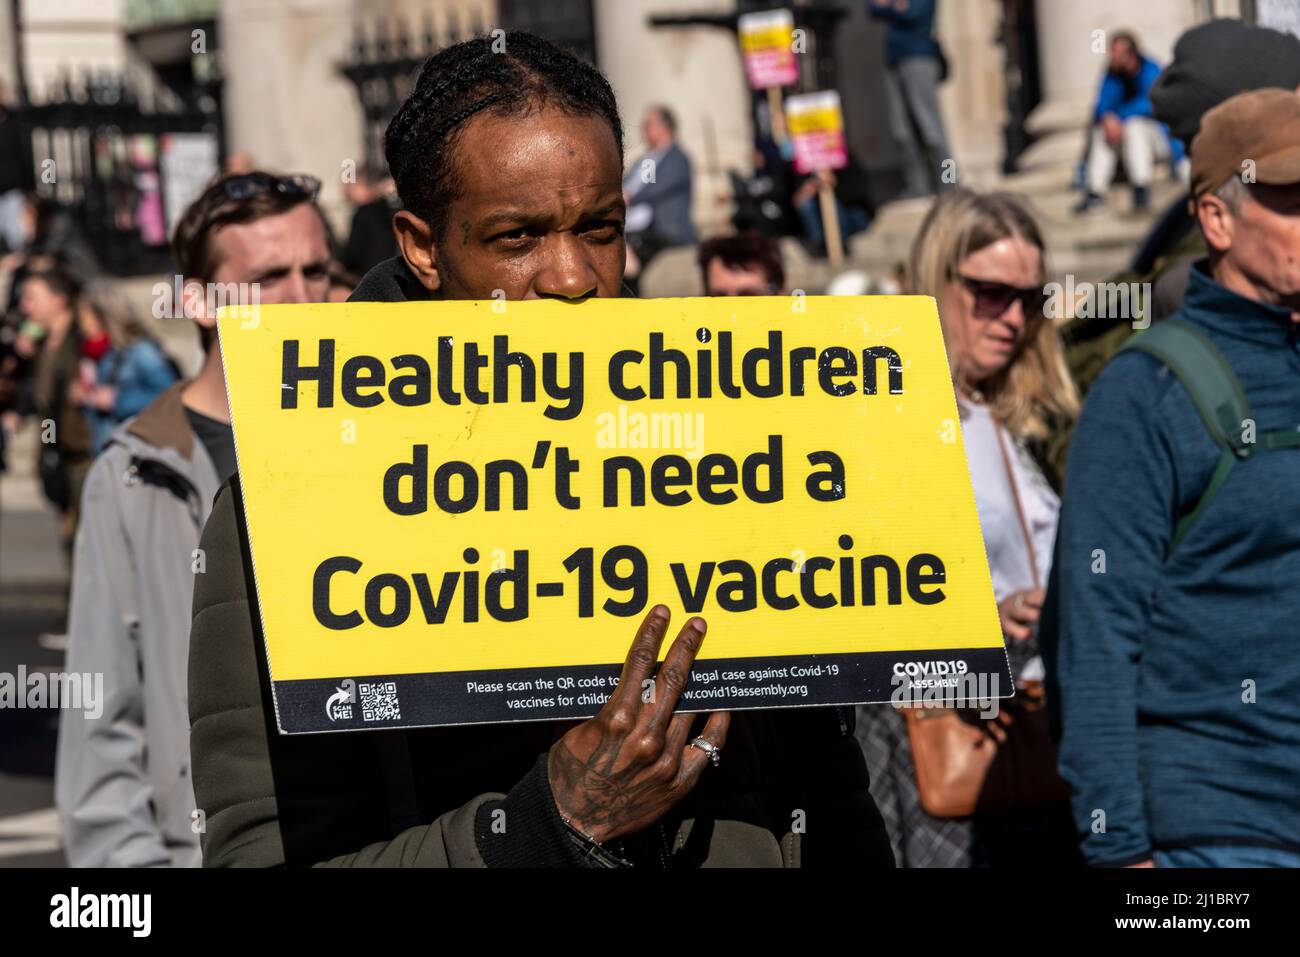 Protest taking place against vaccinating children for Covid 19, joined by anti-vaxxers. Placard stating healthy children don't need a Covid 19 vaccine Stock Photo